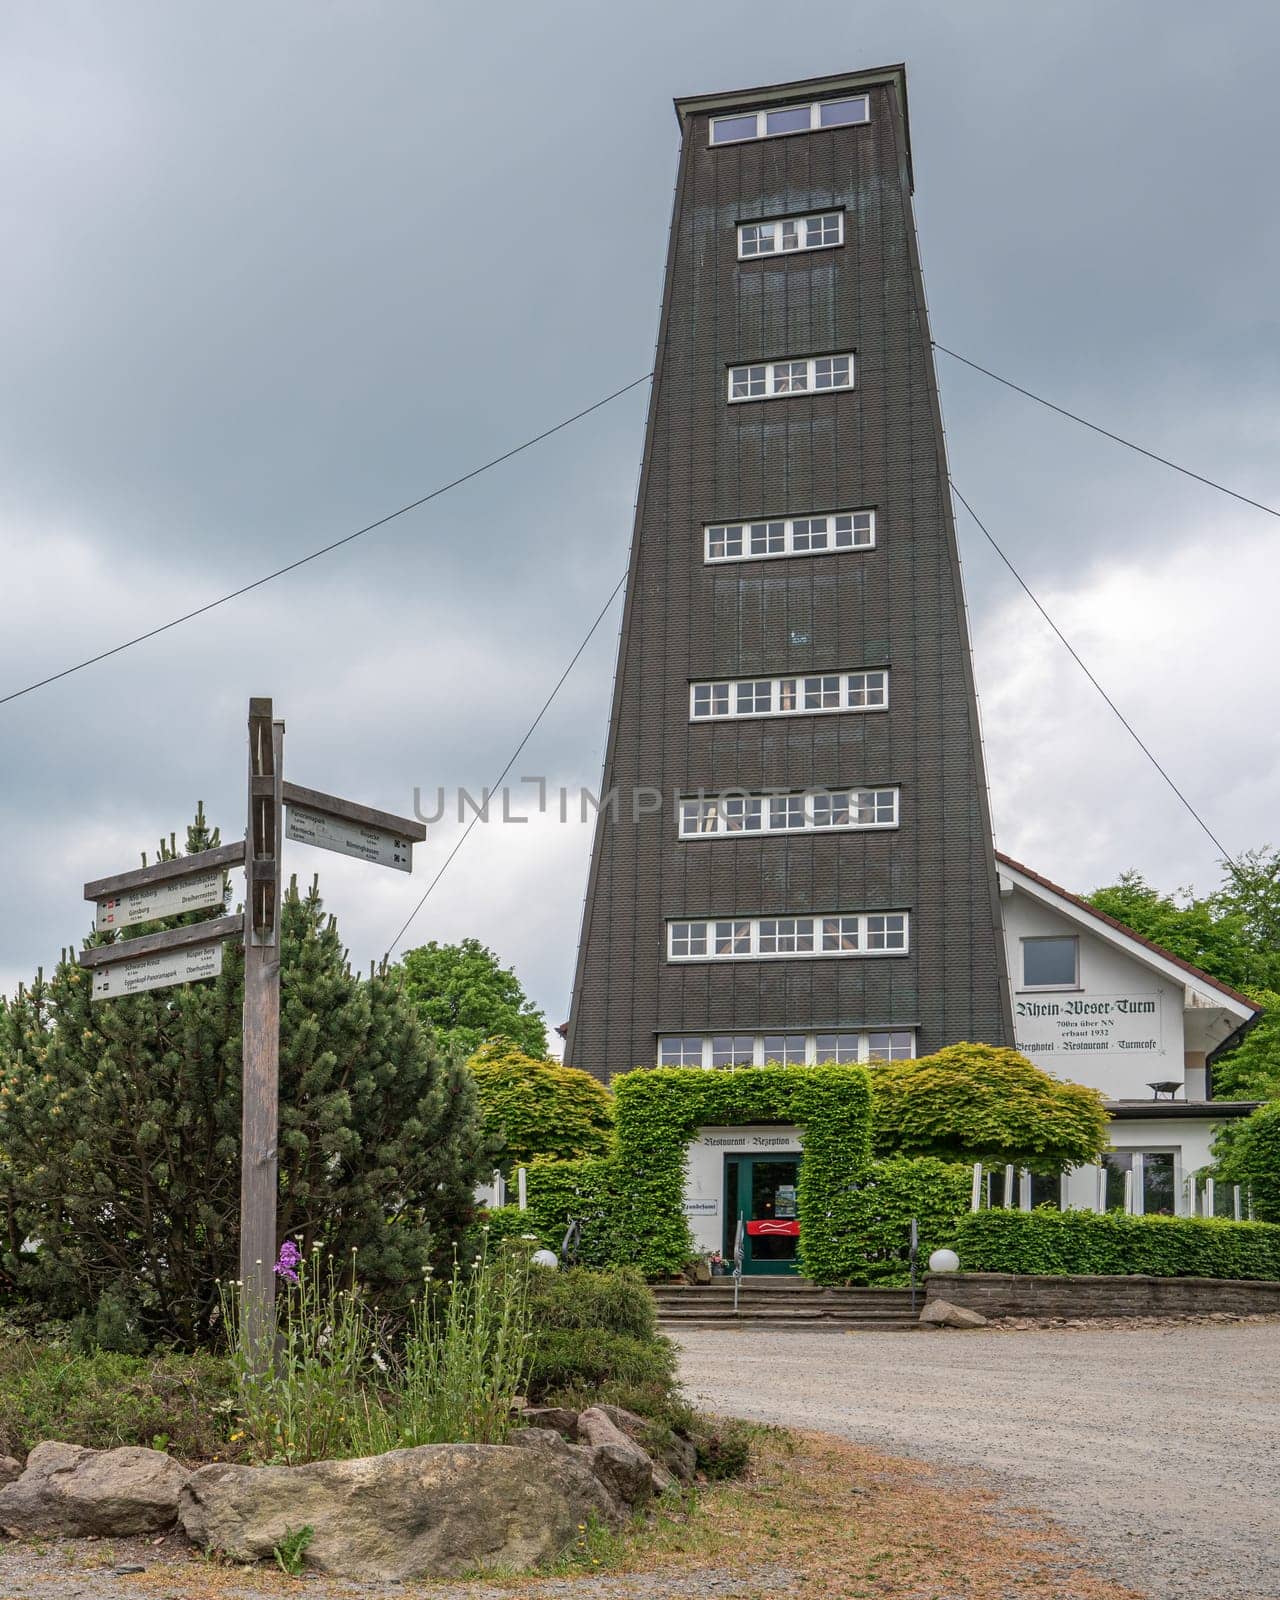 RHINE WESER TOWER, GERMANY - JUNE 7, 2023: Panoramic image of Rhine Weser Tower, tourist attraction on the long distance hiking trail Rothaarsteig on June 7, 2023 in Germany